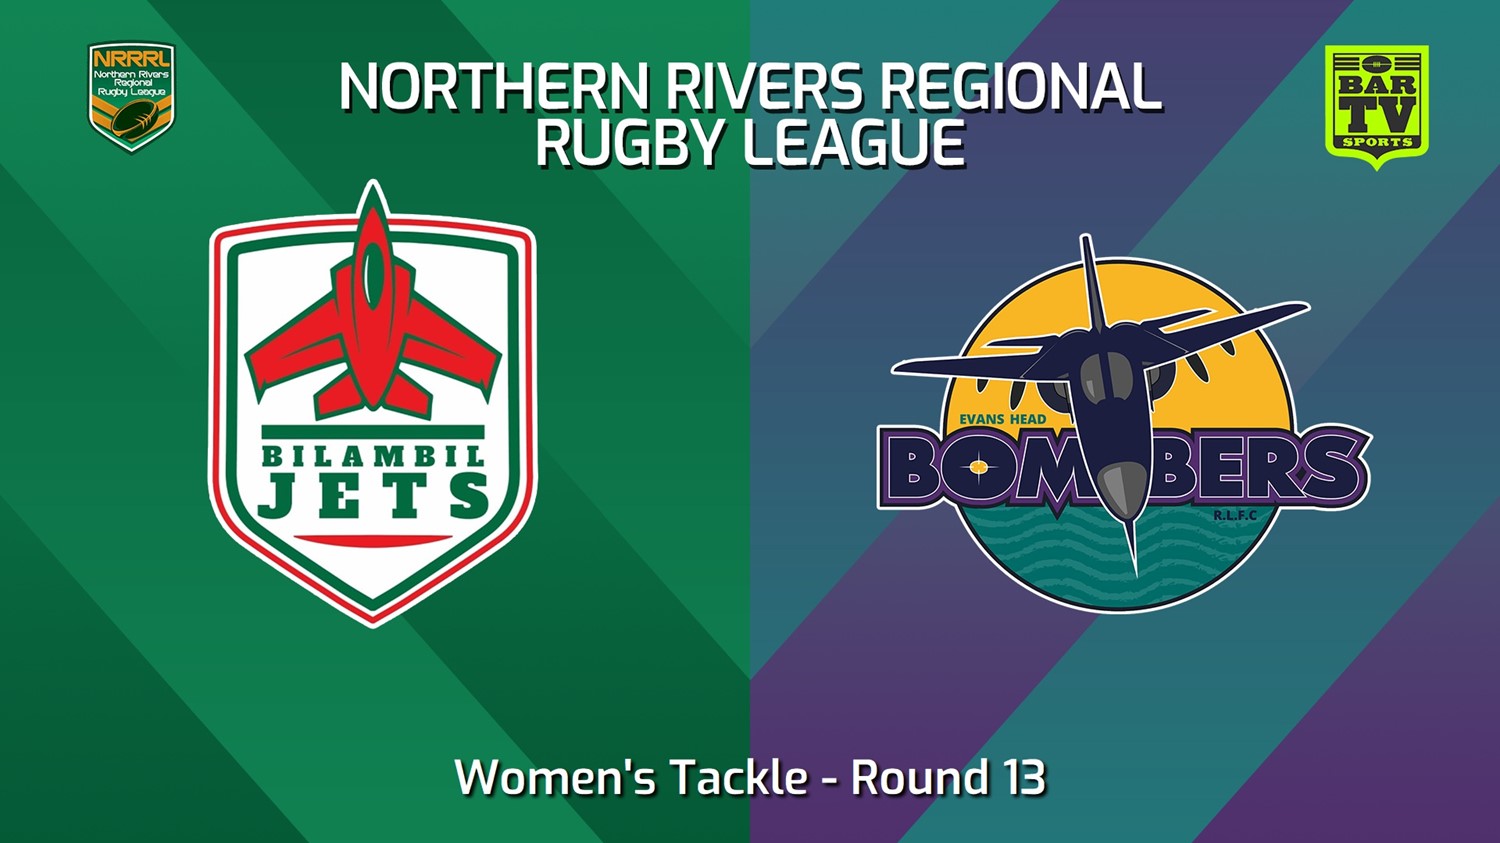 240707-video-Northern Rivers Round 13 - Women's Tackle - Bilambil Jets v Evans Head Bombers Slate Image